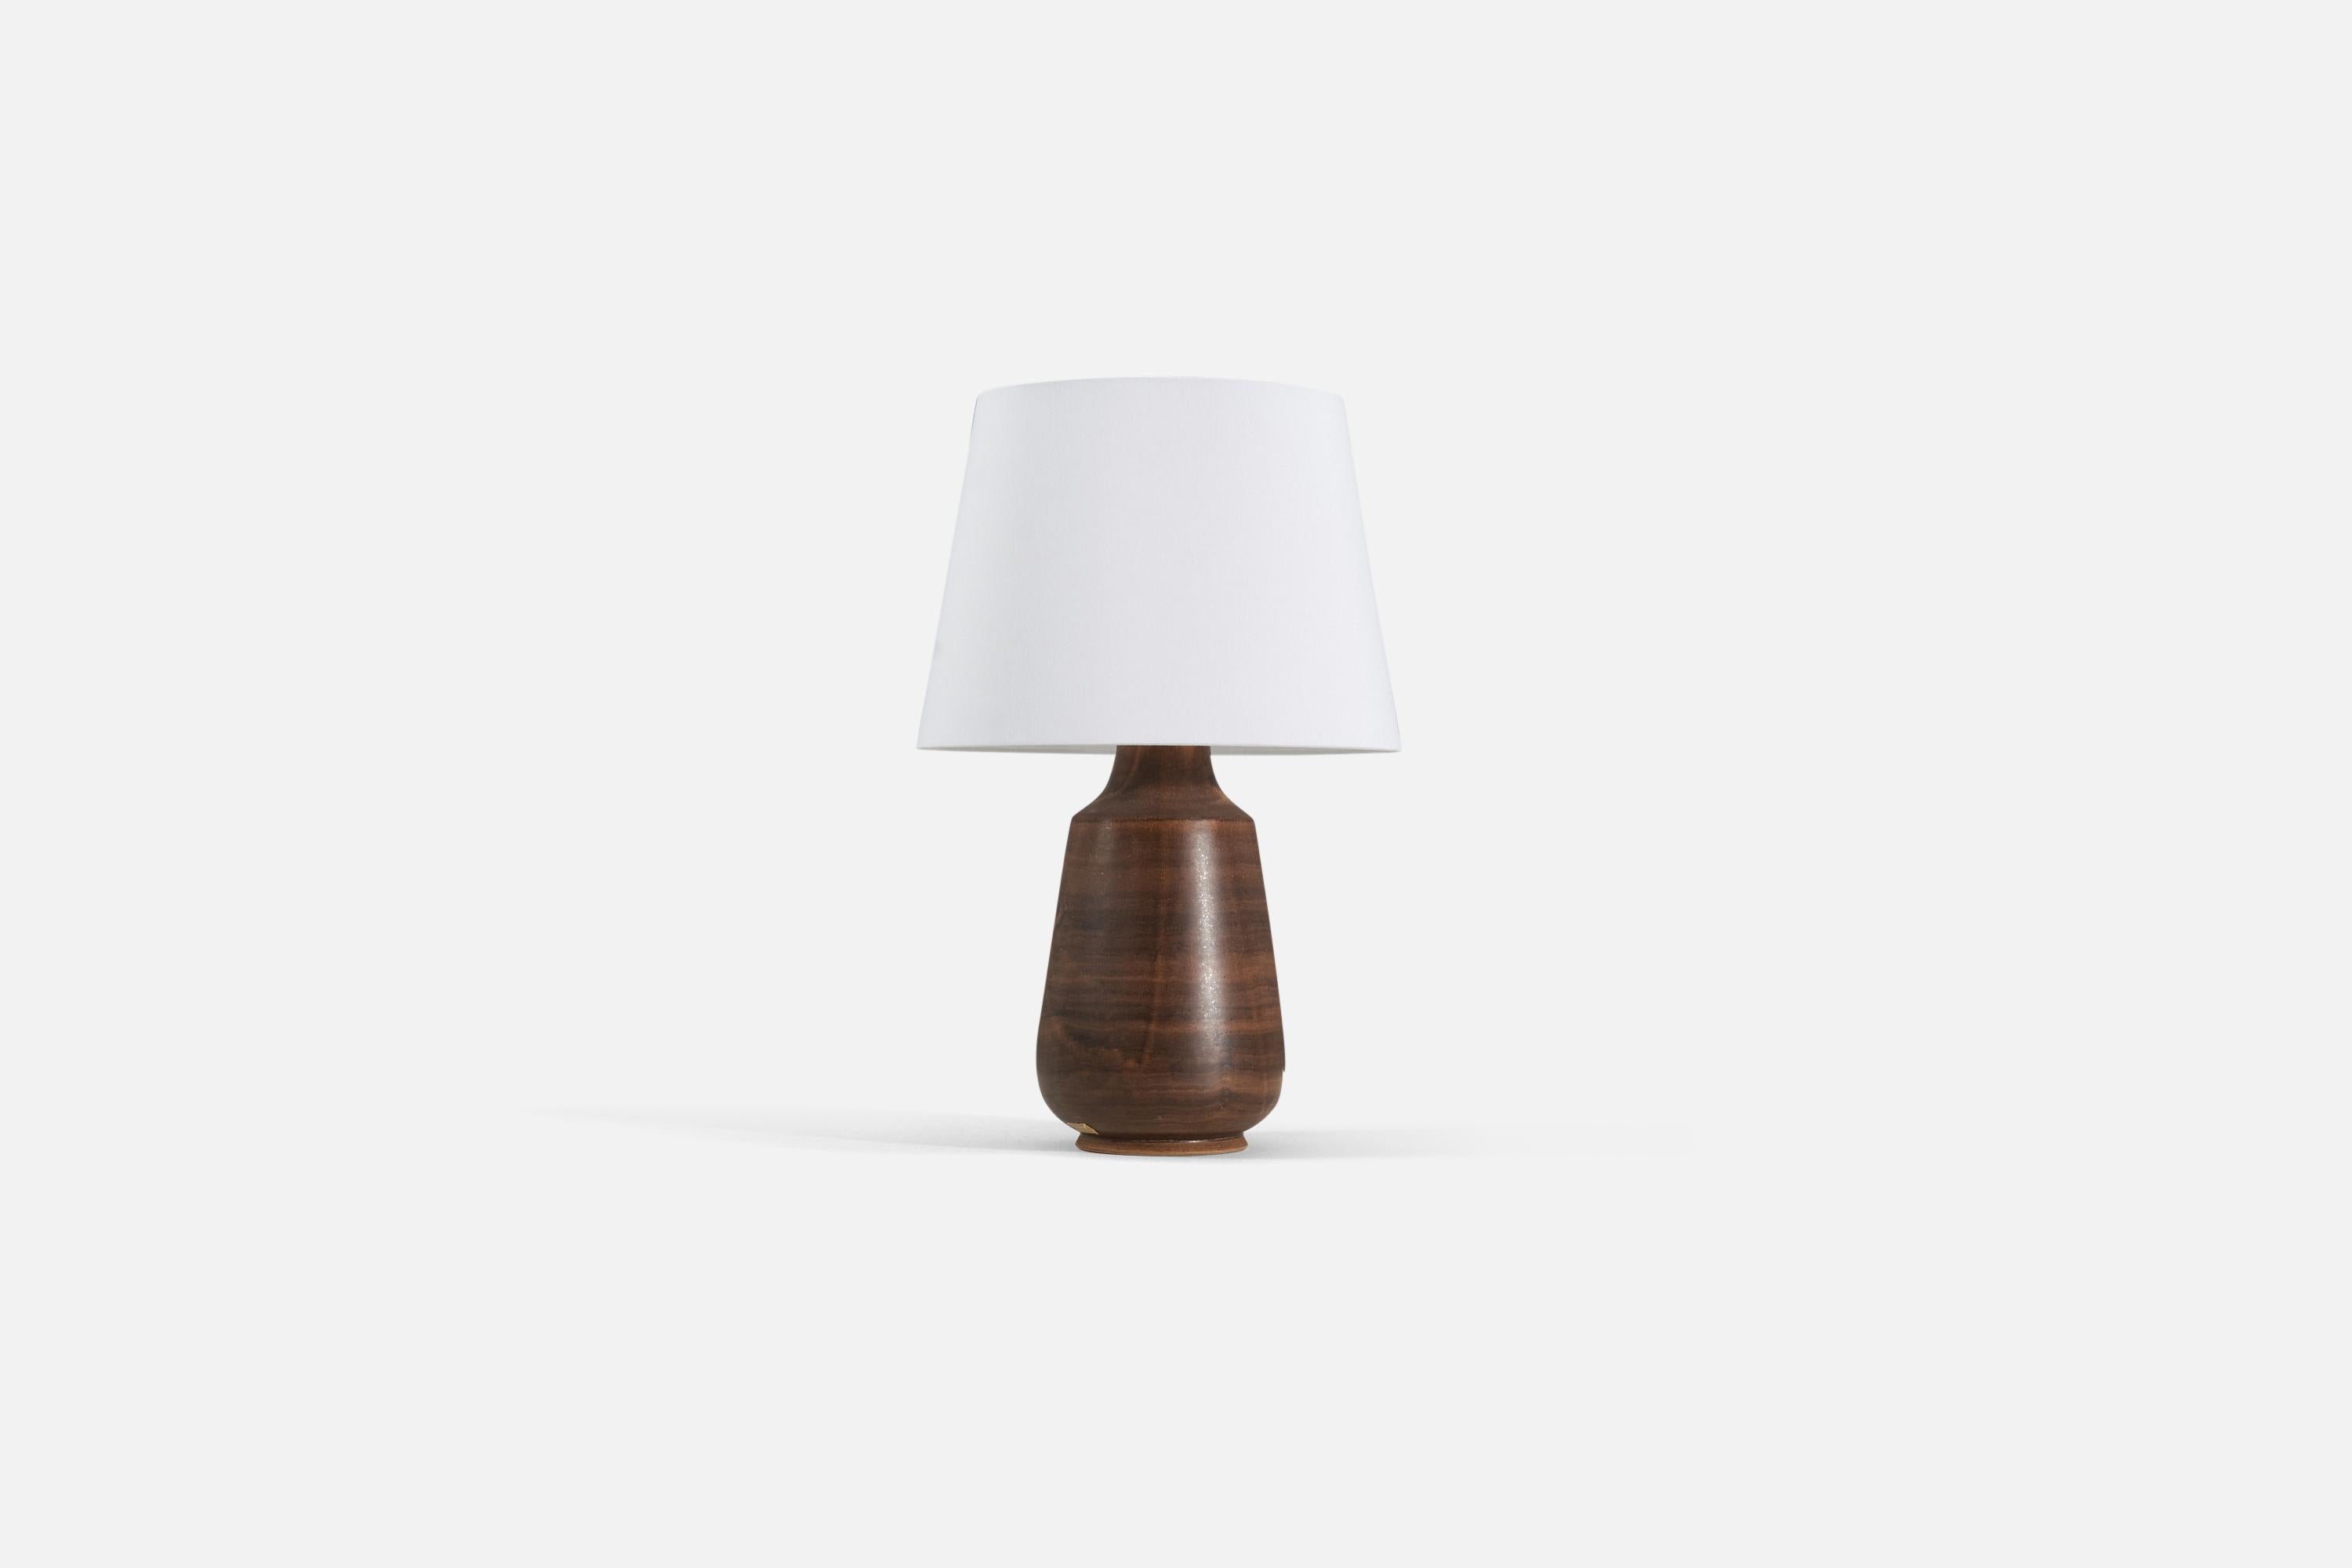 A brown-glazed stoneware table lamp produced by Löneberga Keramik, Sweden, 1960s.

Lamp sold without lampshade. 

Measurements are of lamp.
Shade : 9 x 12 x 9
Lamp with shade : 18.75 x 12 x 12.